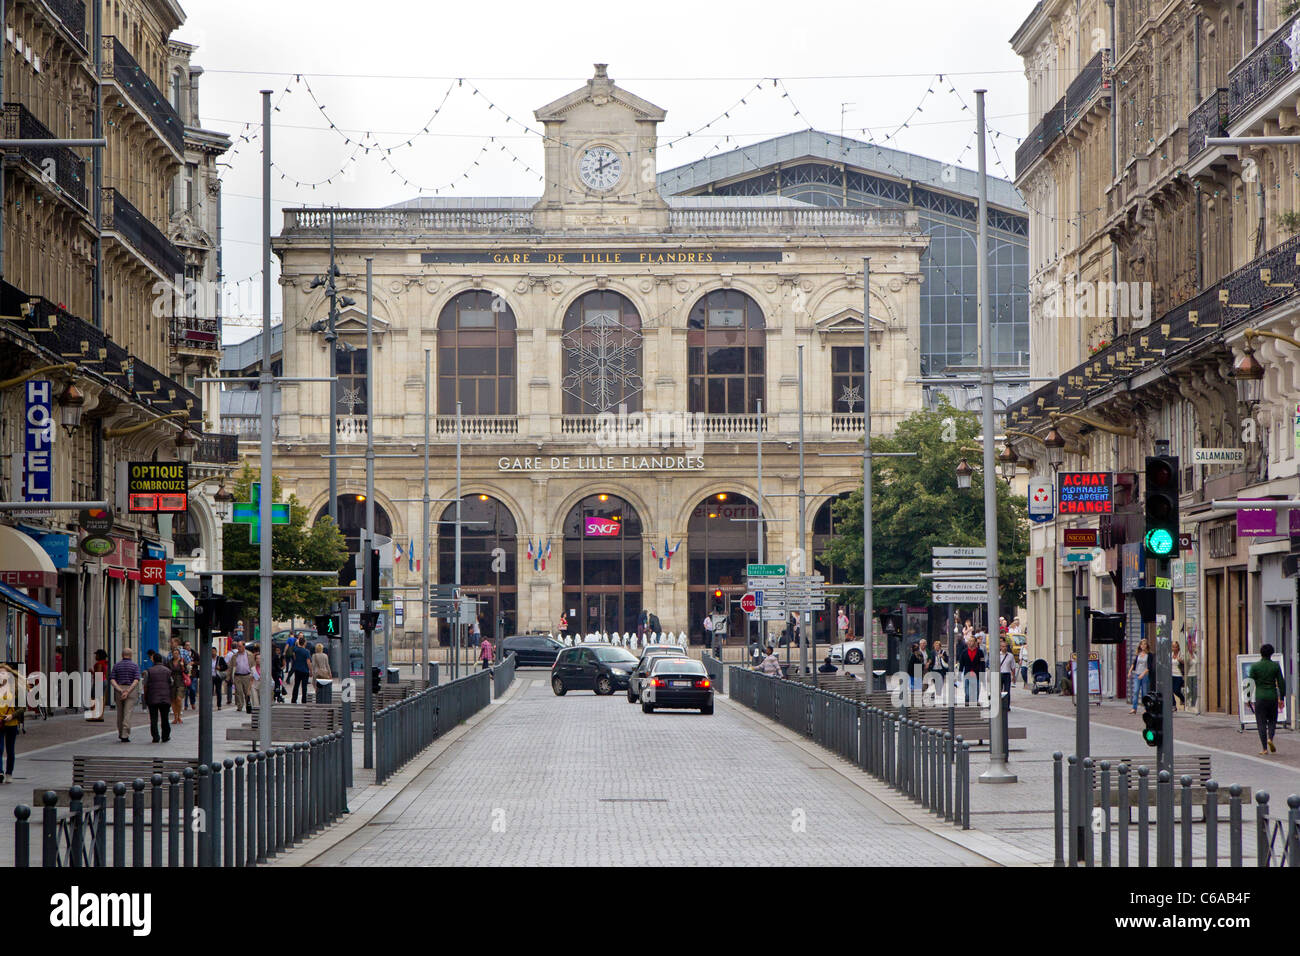 The station of Lille Flandres in the city of Lille, Nord-Pas de Calais, France Stock Photo